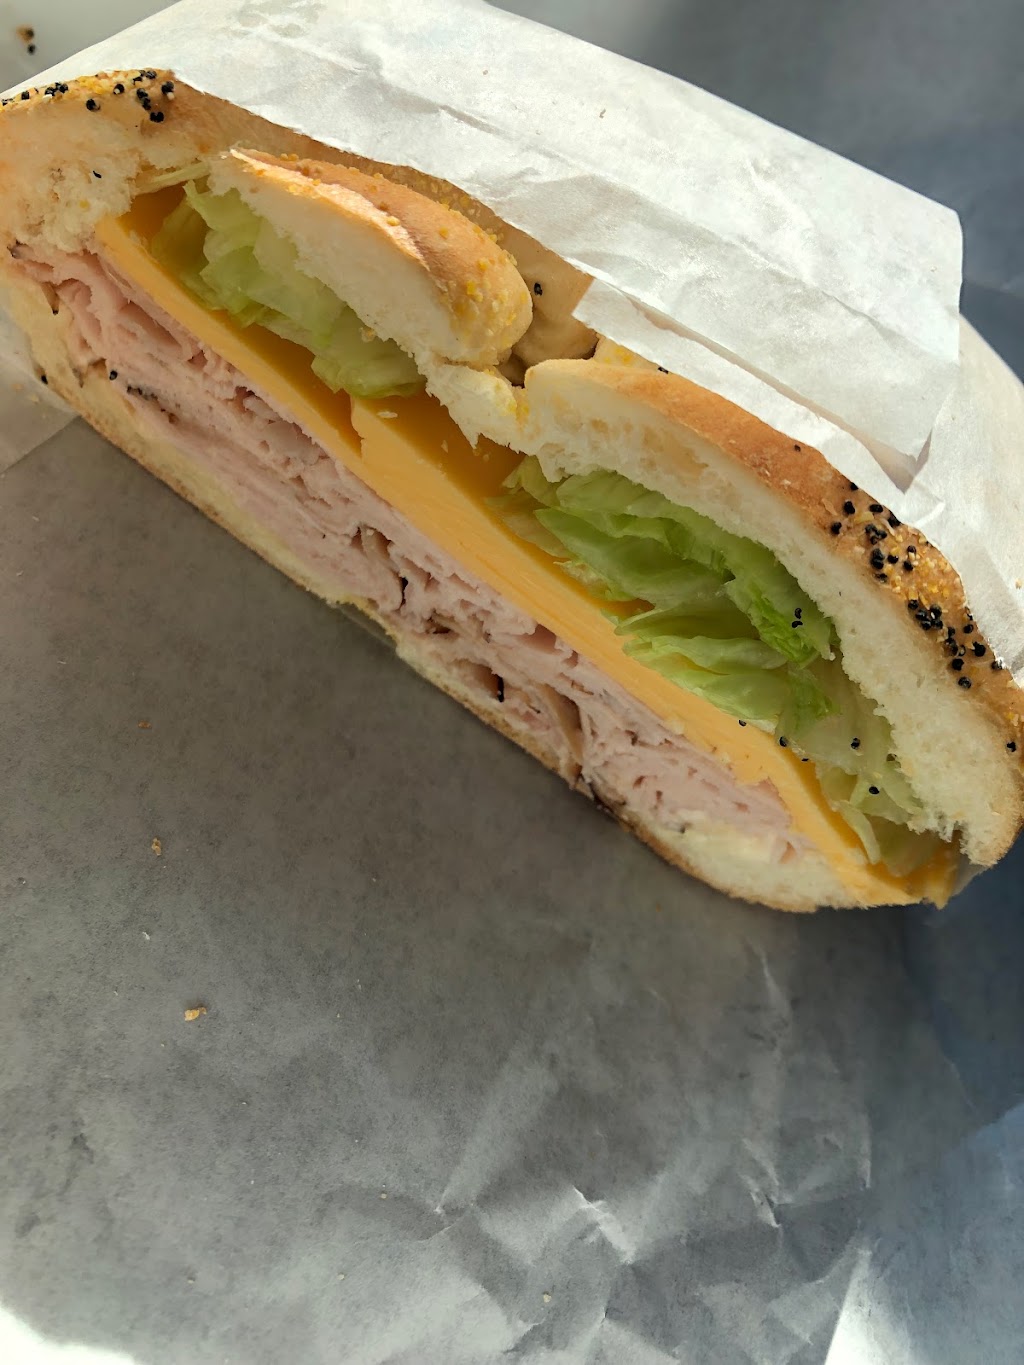 Harvest Moon Deli | 151 Middle Country Rd, Ridge, NY 11961 | Phone: (631) 448-7156